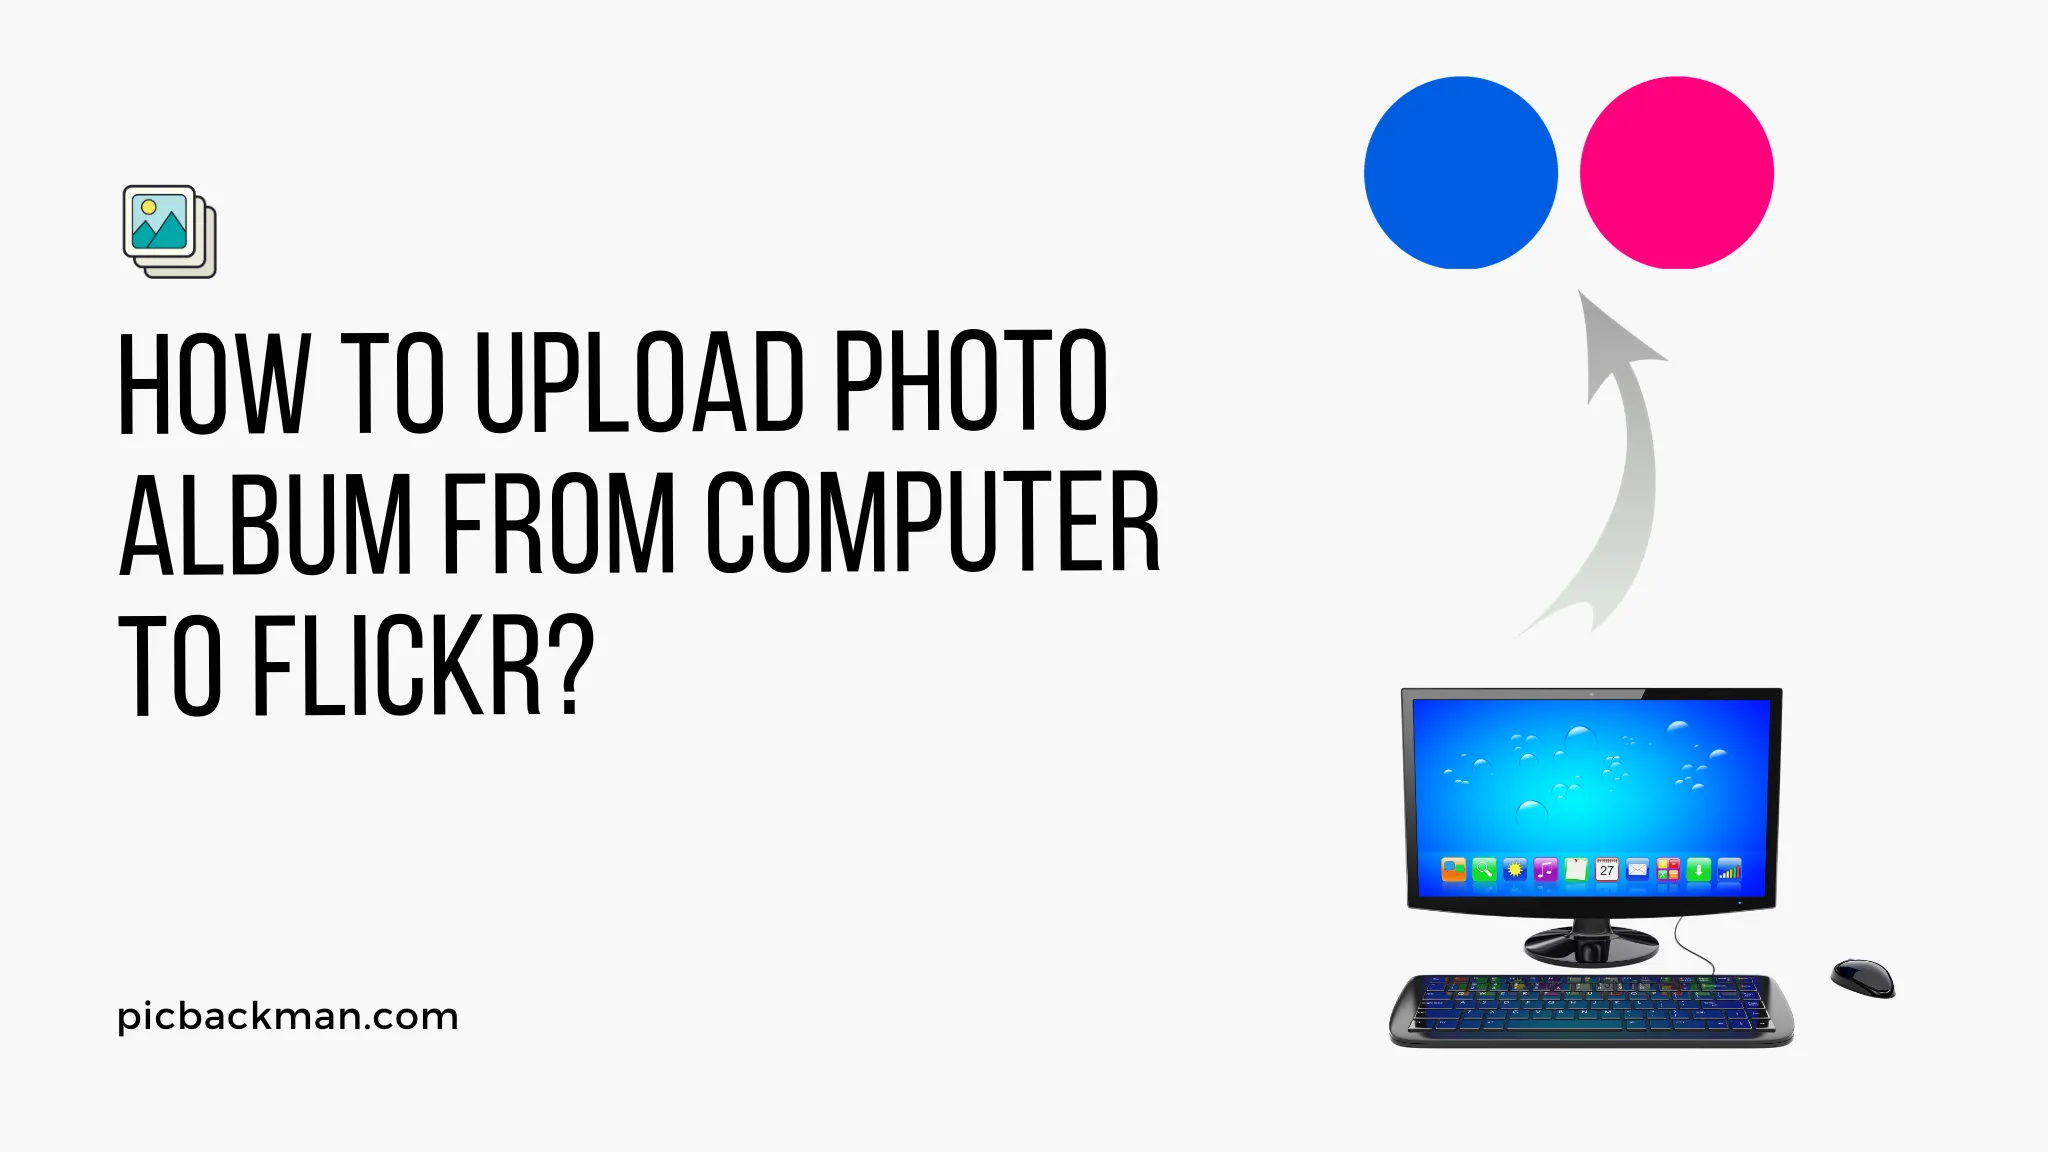 How to upload Photo Album From Computer to Flickr?